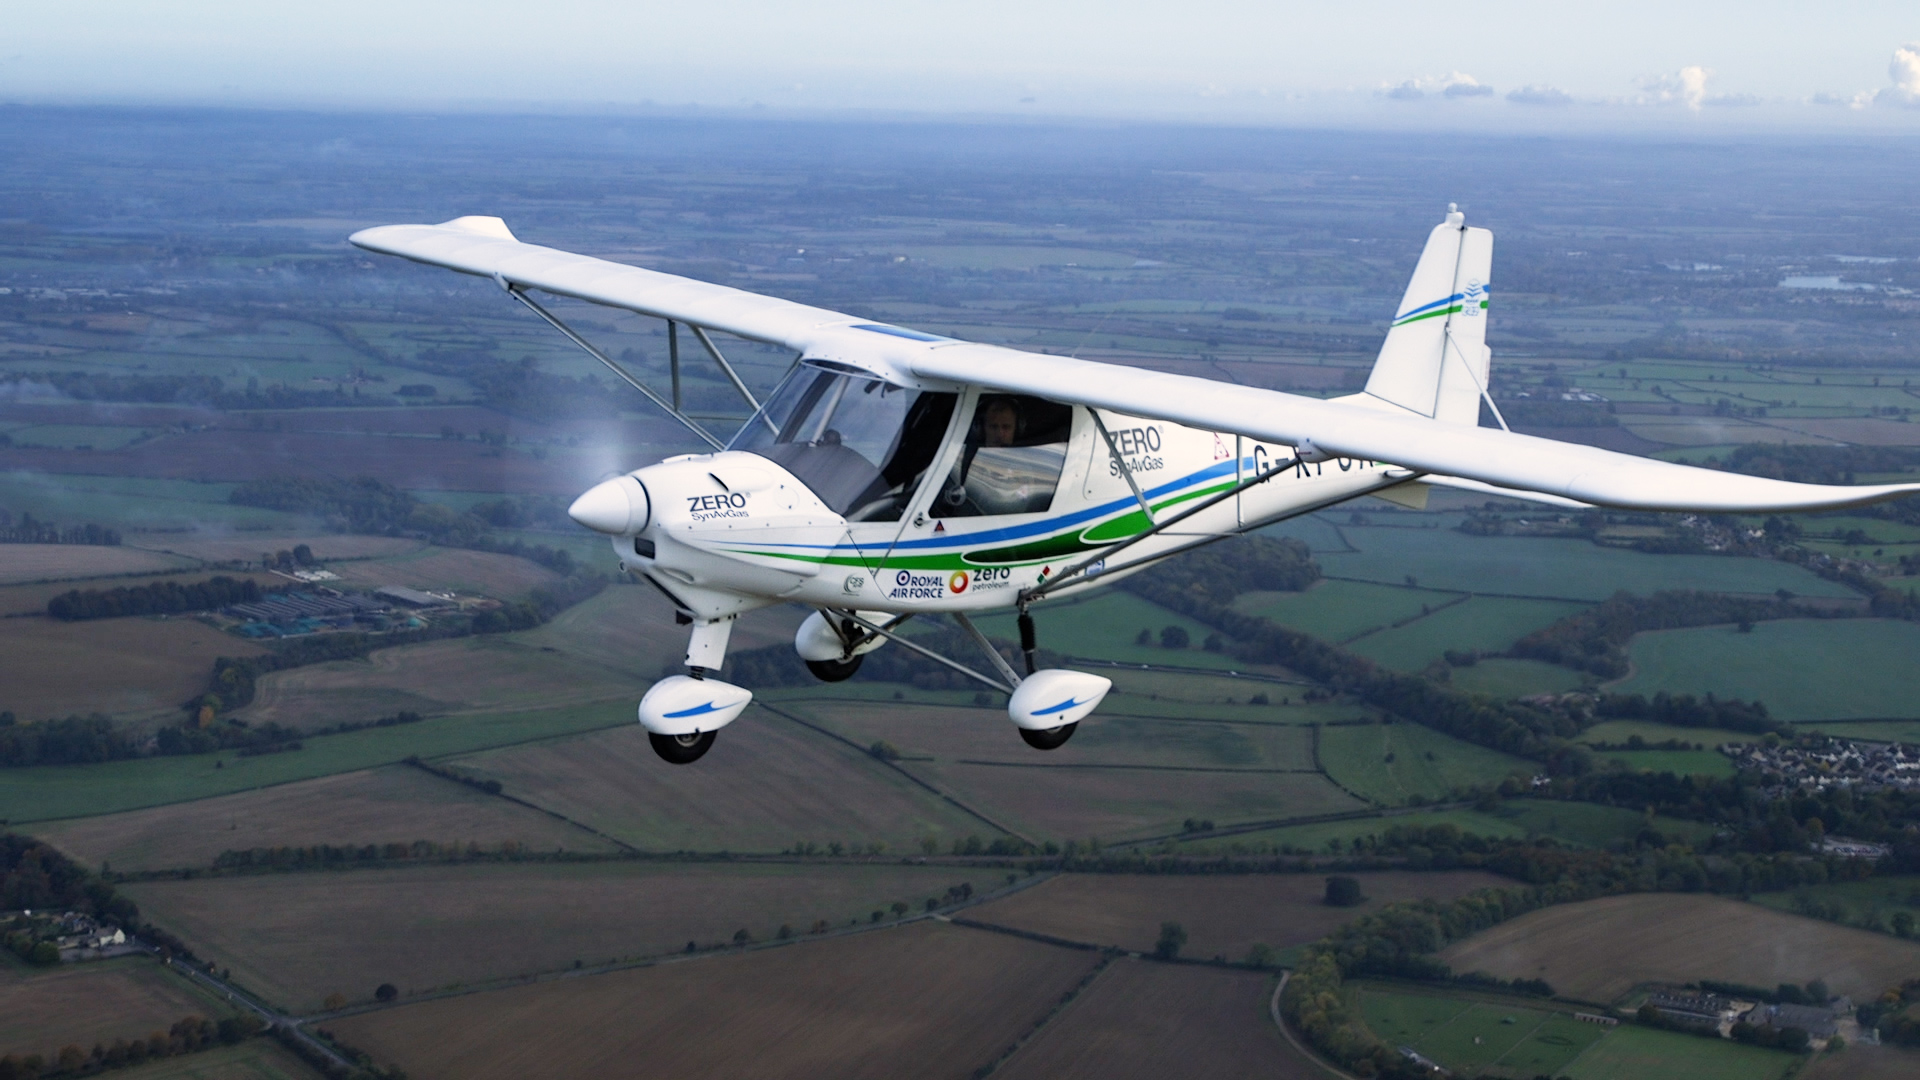 Image shows a microlight aircraft in flight over fields.